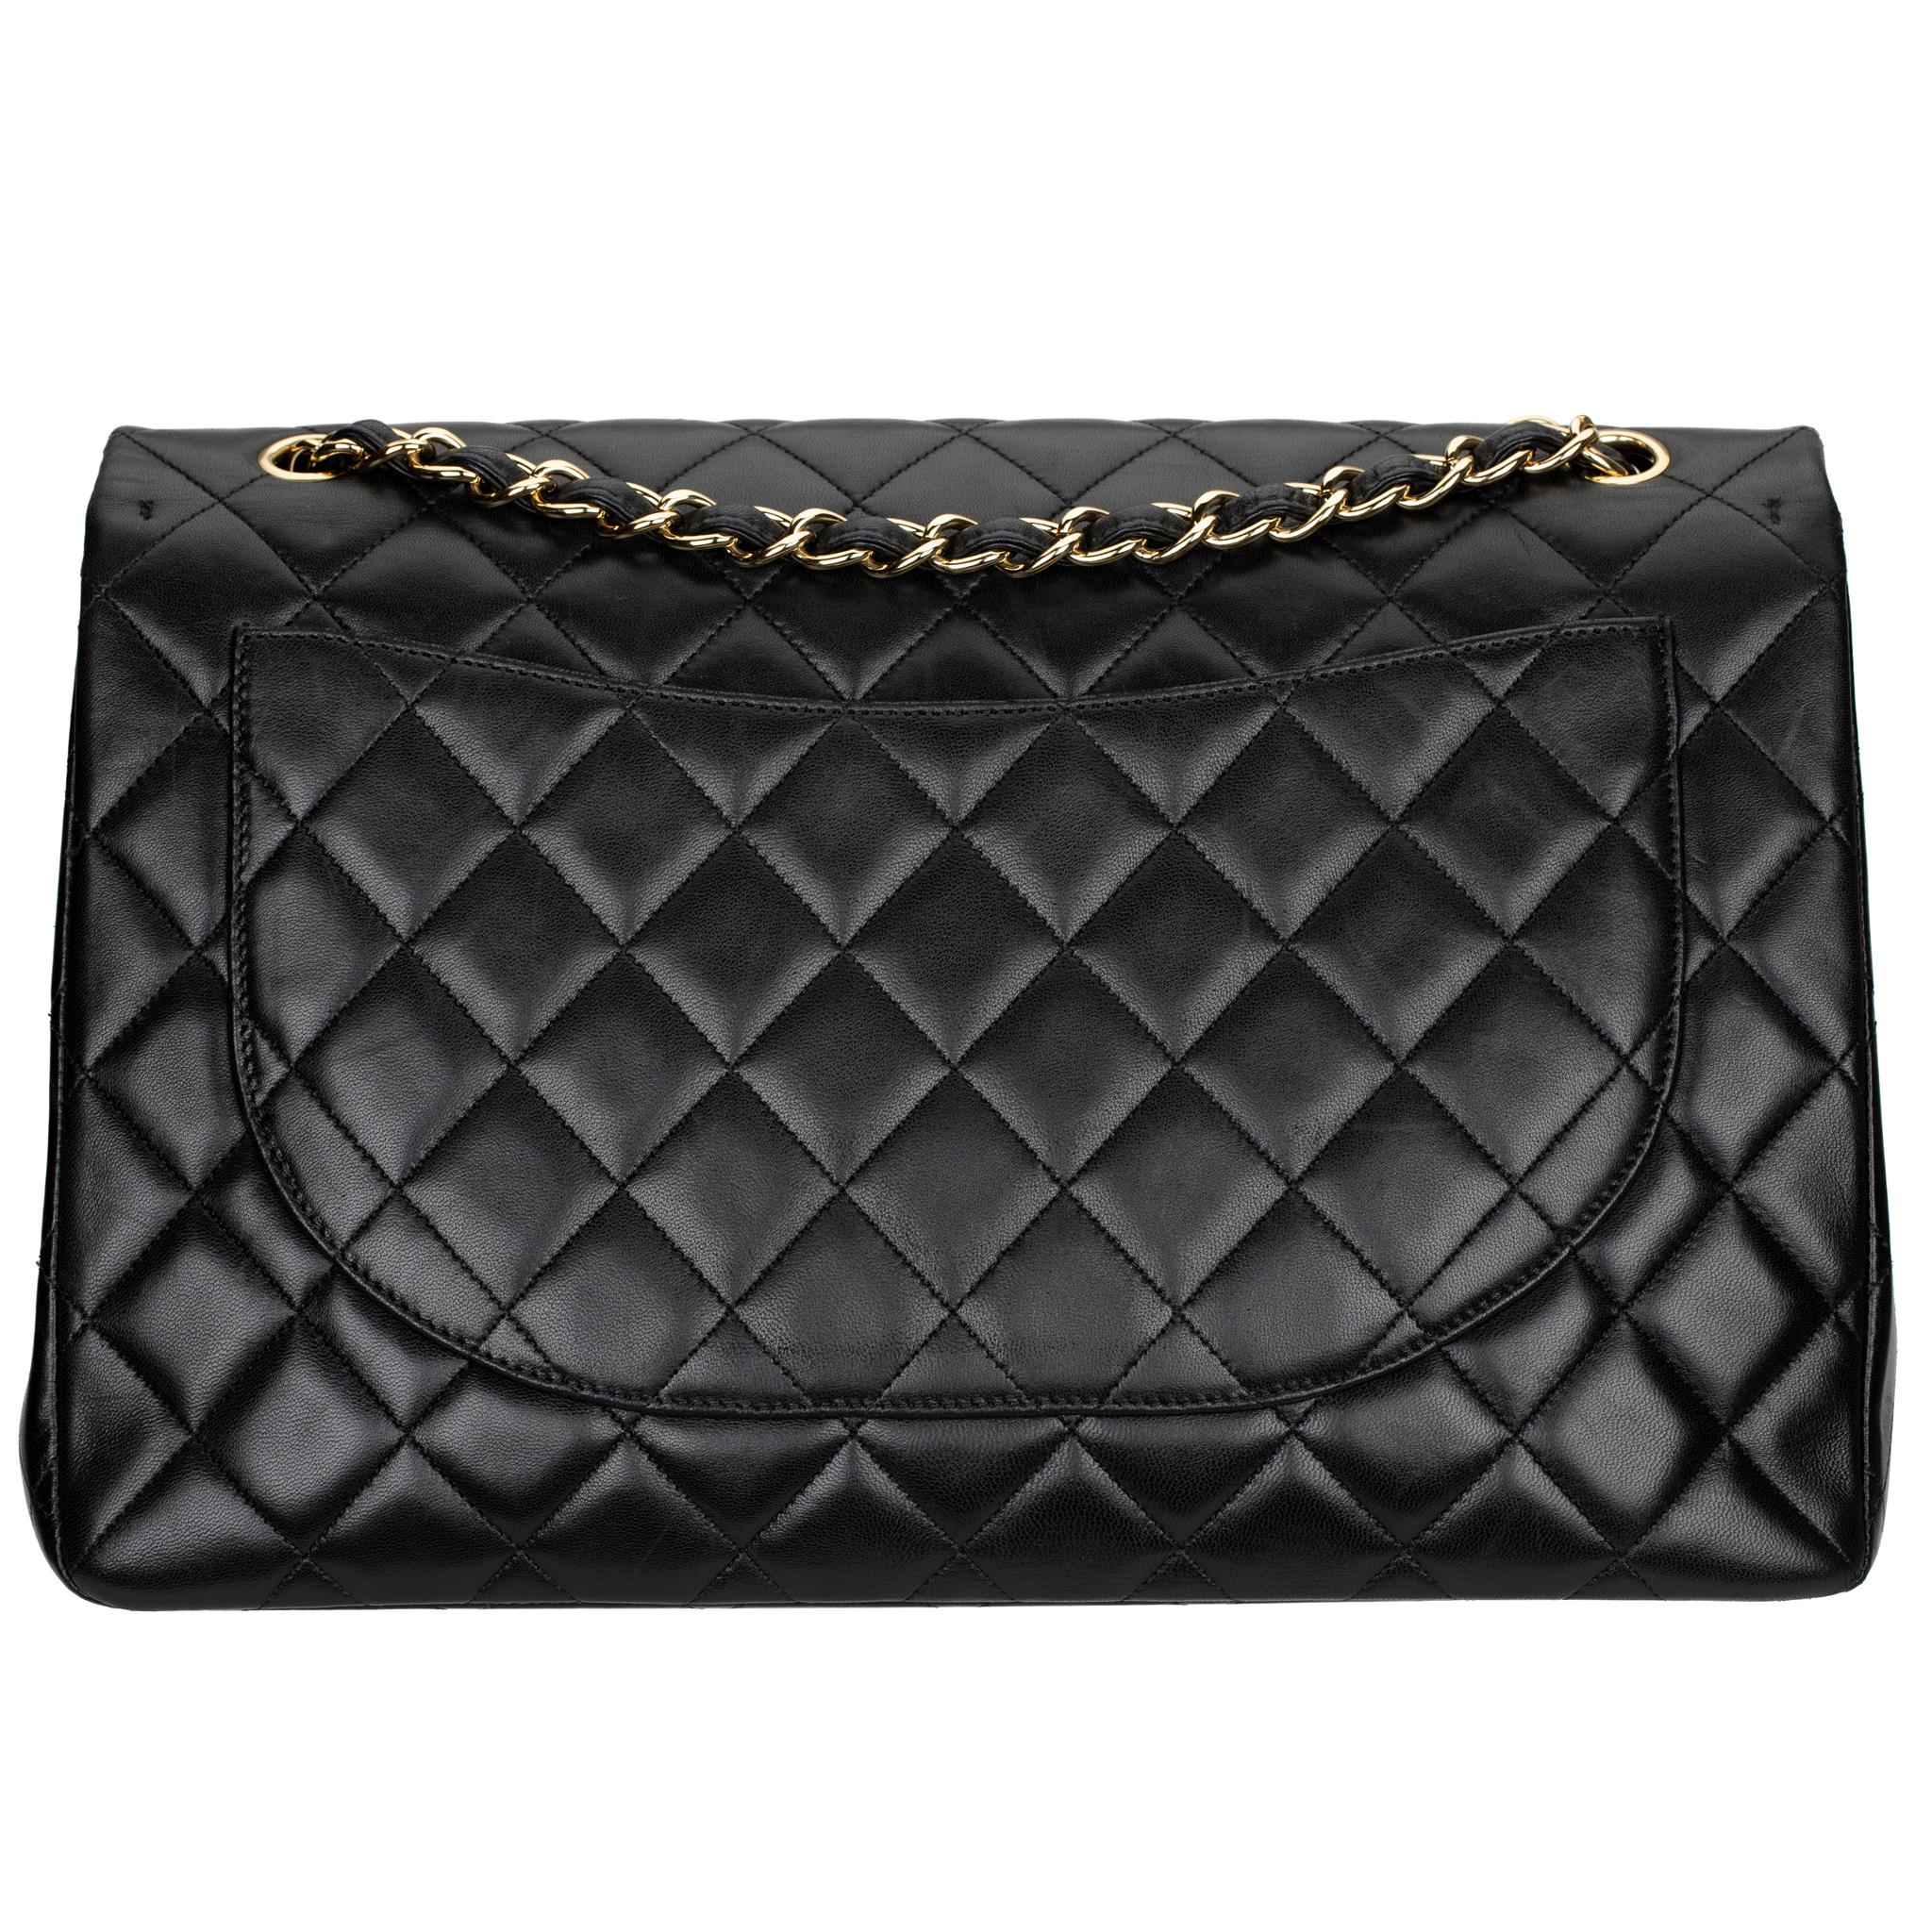 Chanel Maxi Classic Flap Black Quilted Lambskin Leather Gold-Tone Hardware 8